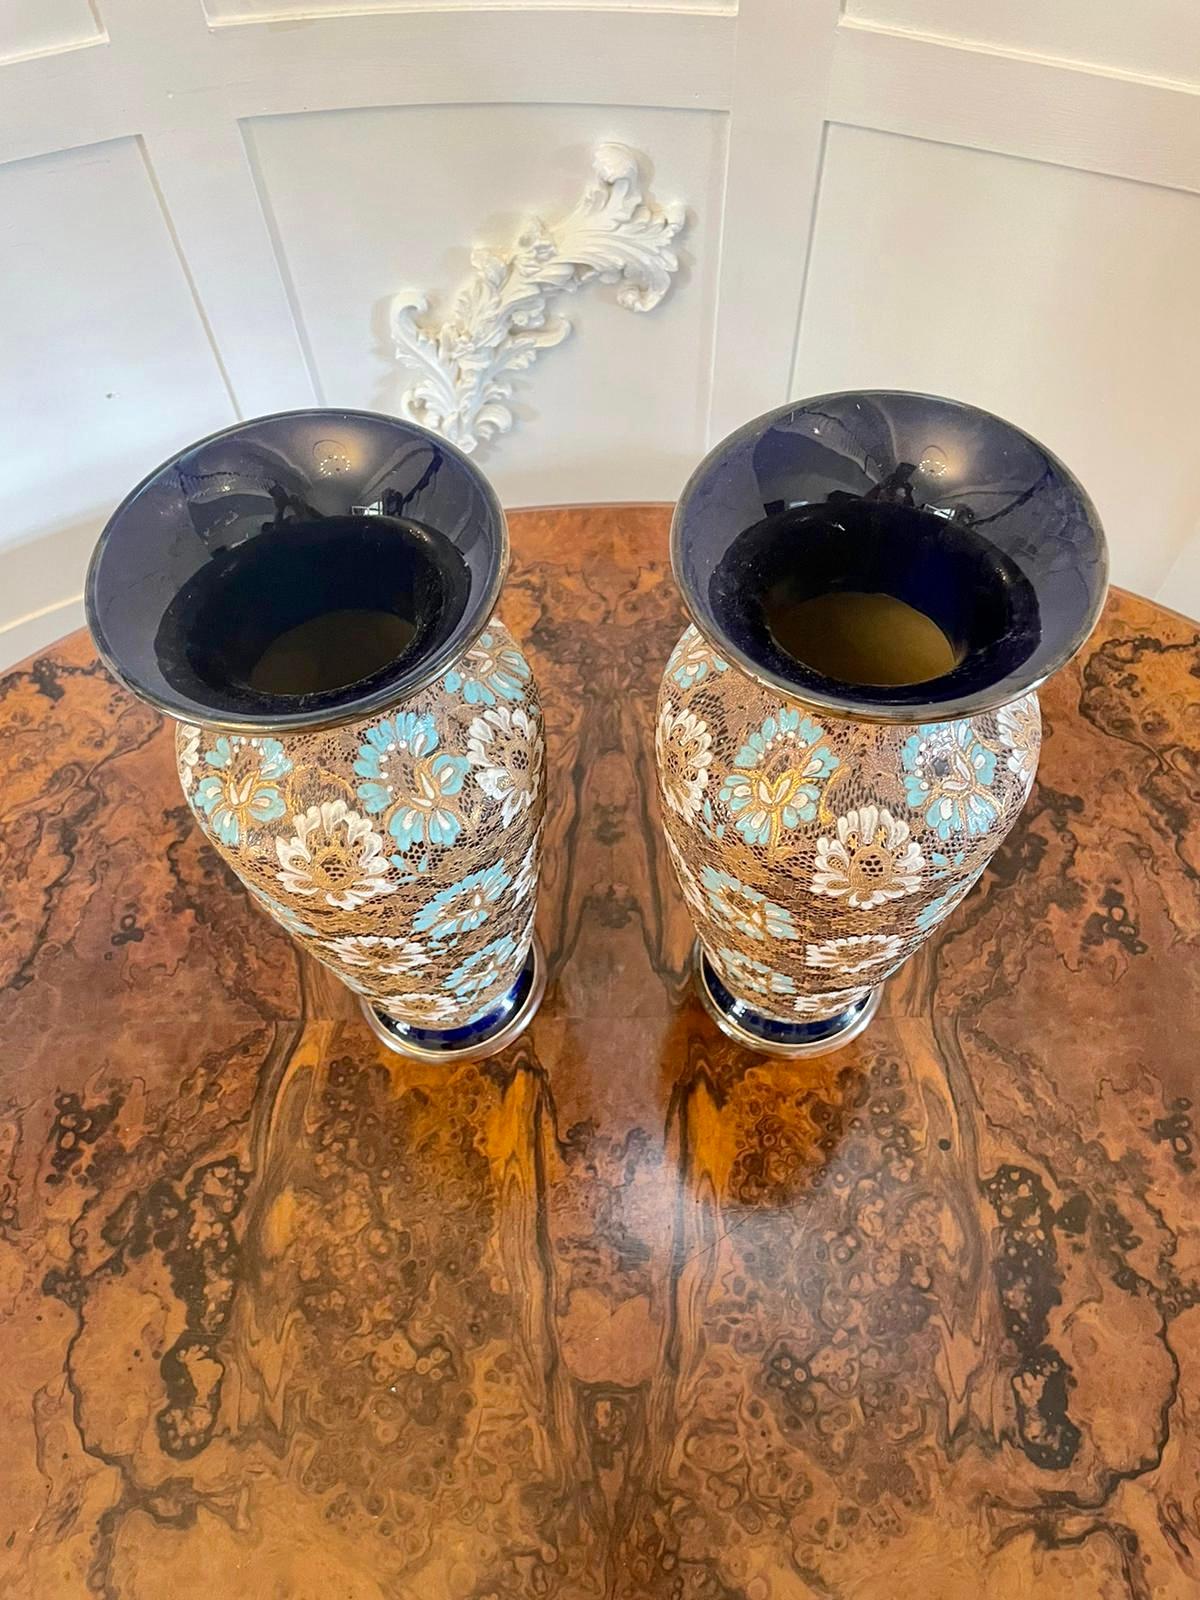 Large pair of antique Victorian Lambeth Doulton vases having fantastic floral designs on an impressed lace background; in wonderful gold, blue white colours raised on circular stepped bases. 

A beautifully crafted decorative pair. 

41 x 18 x